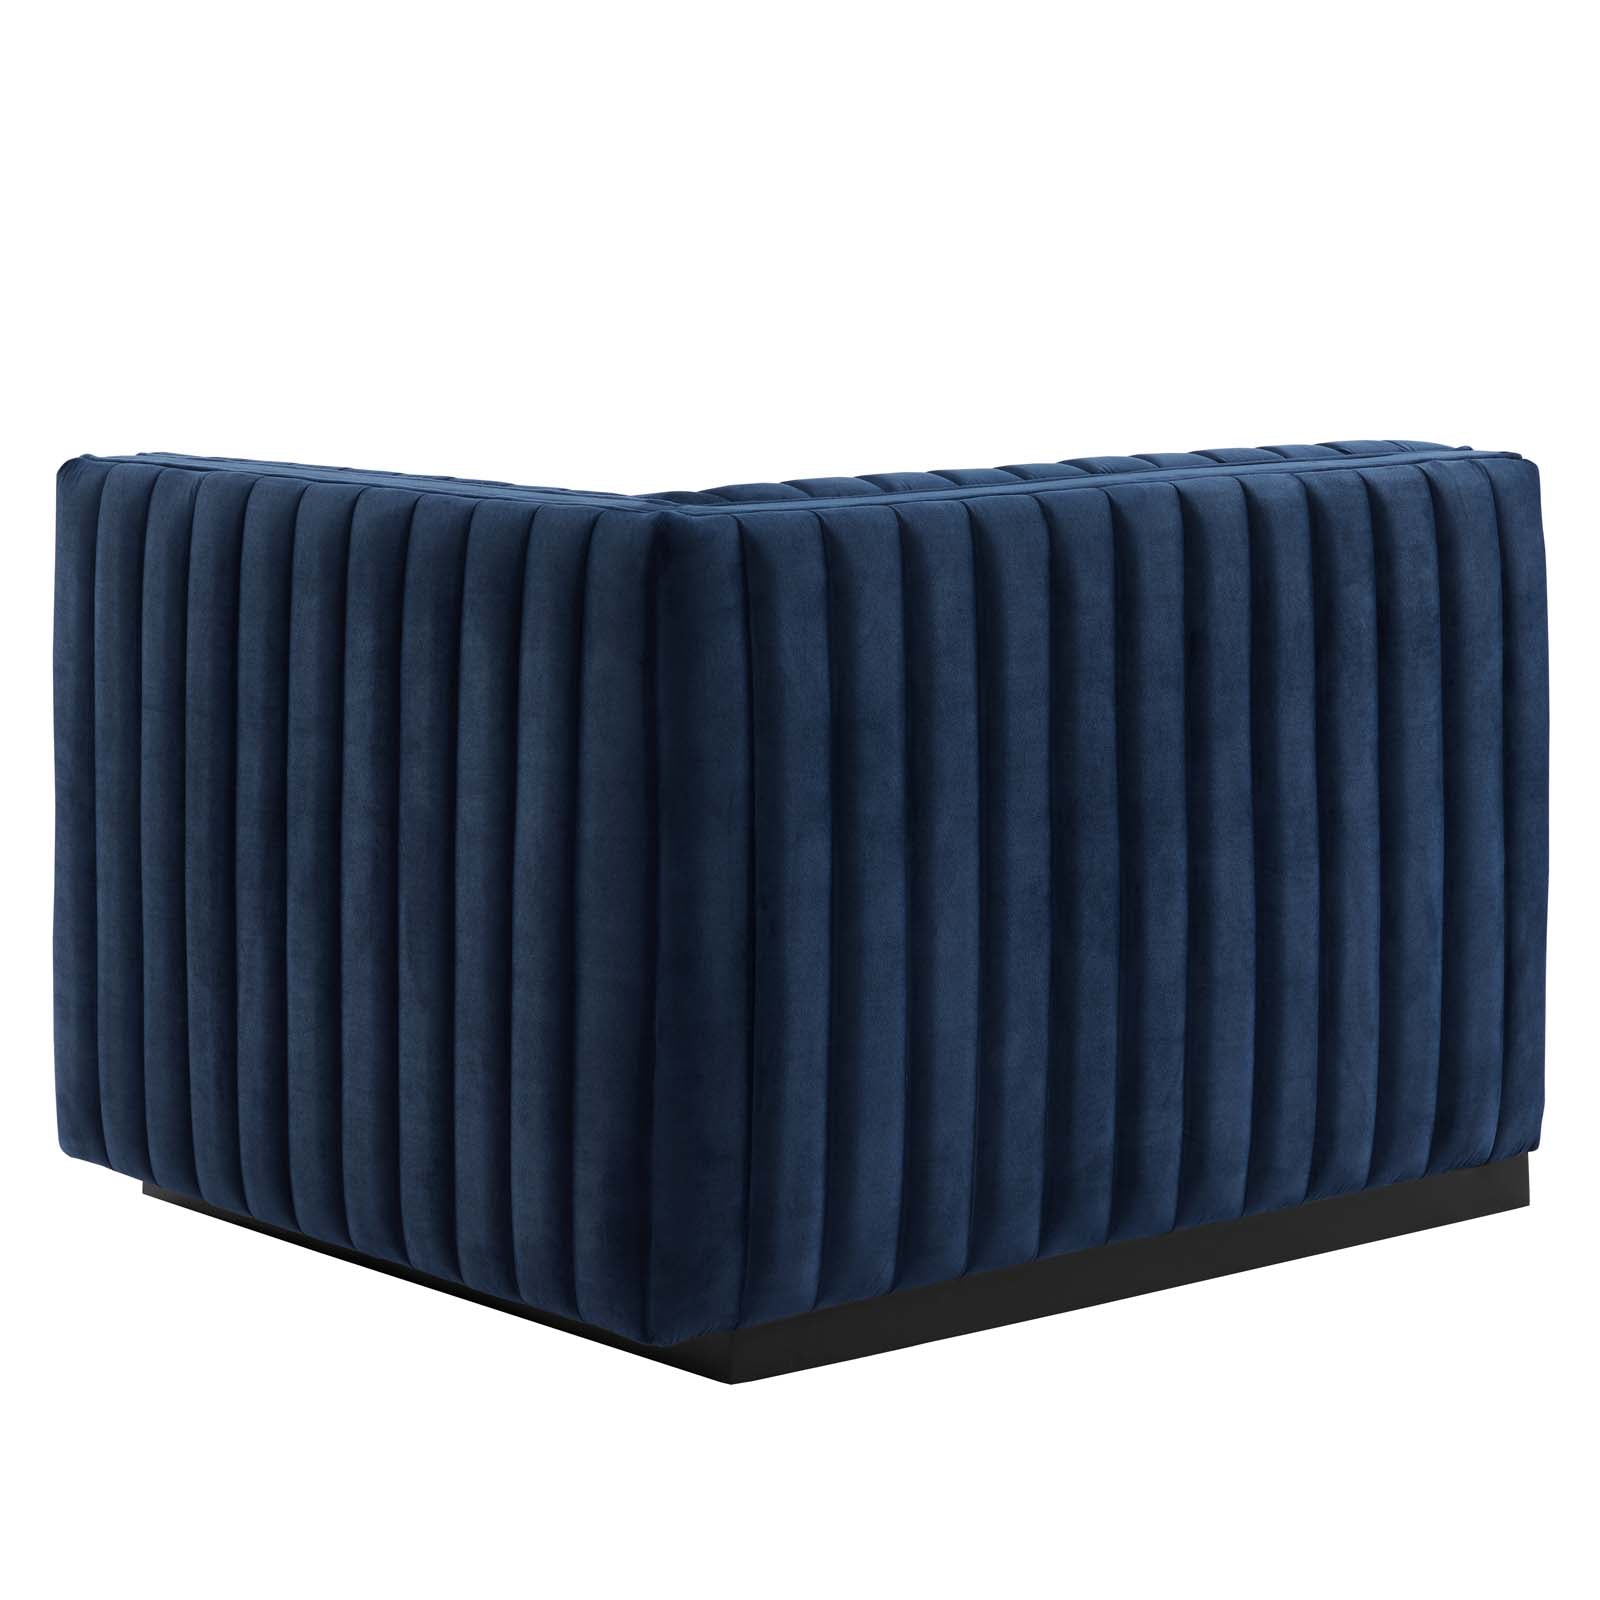 Modway Sectional Sofas - Conjure Channel Tufted Performance Velvet 119"W 5-Piece Sectional Black Midnight Blue